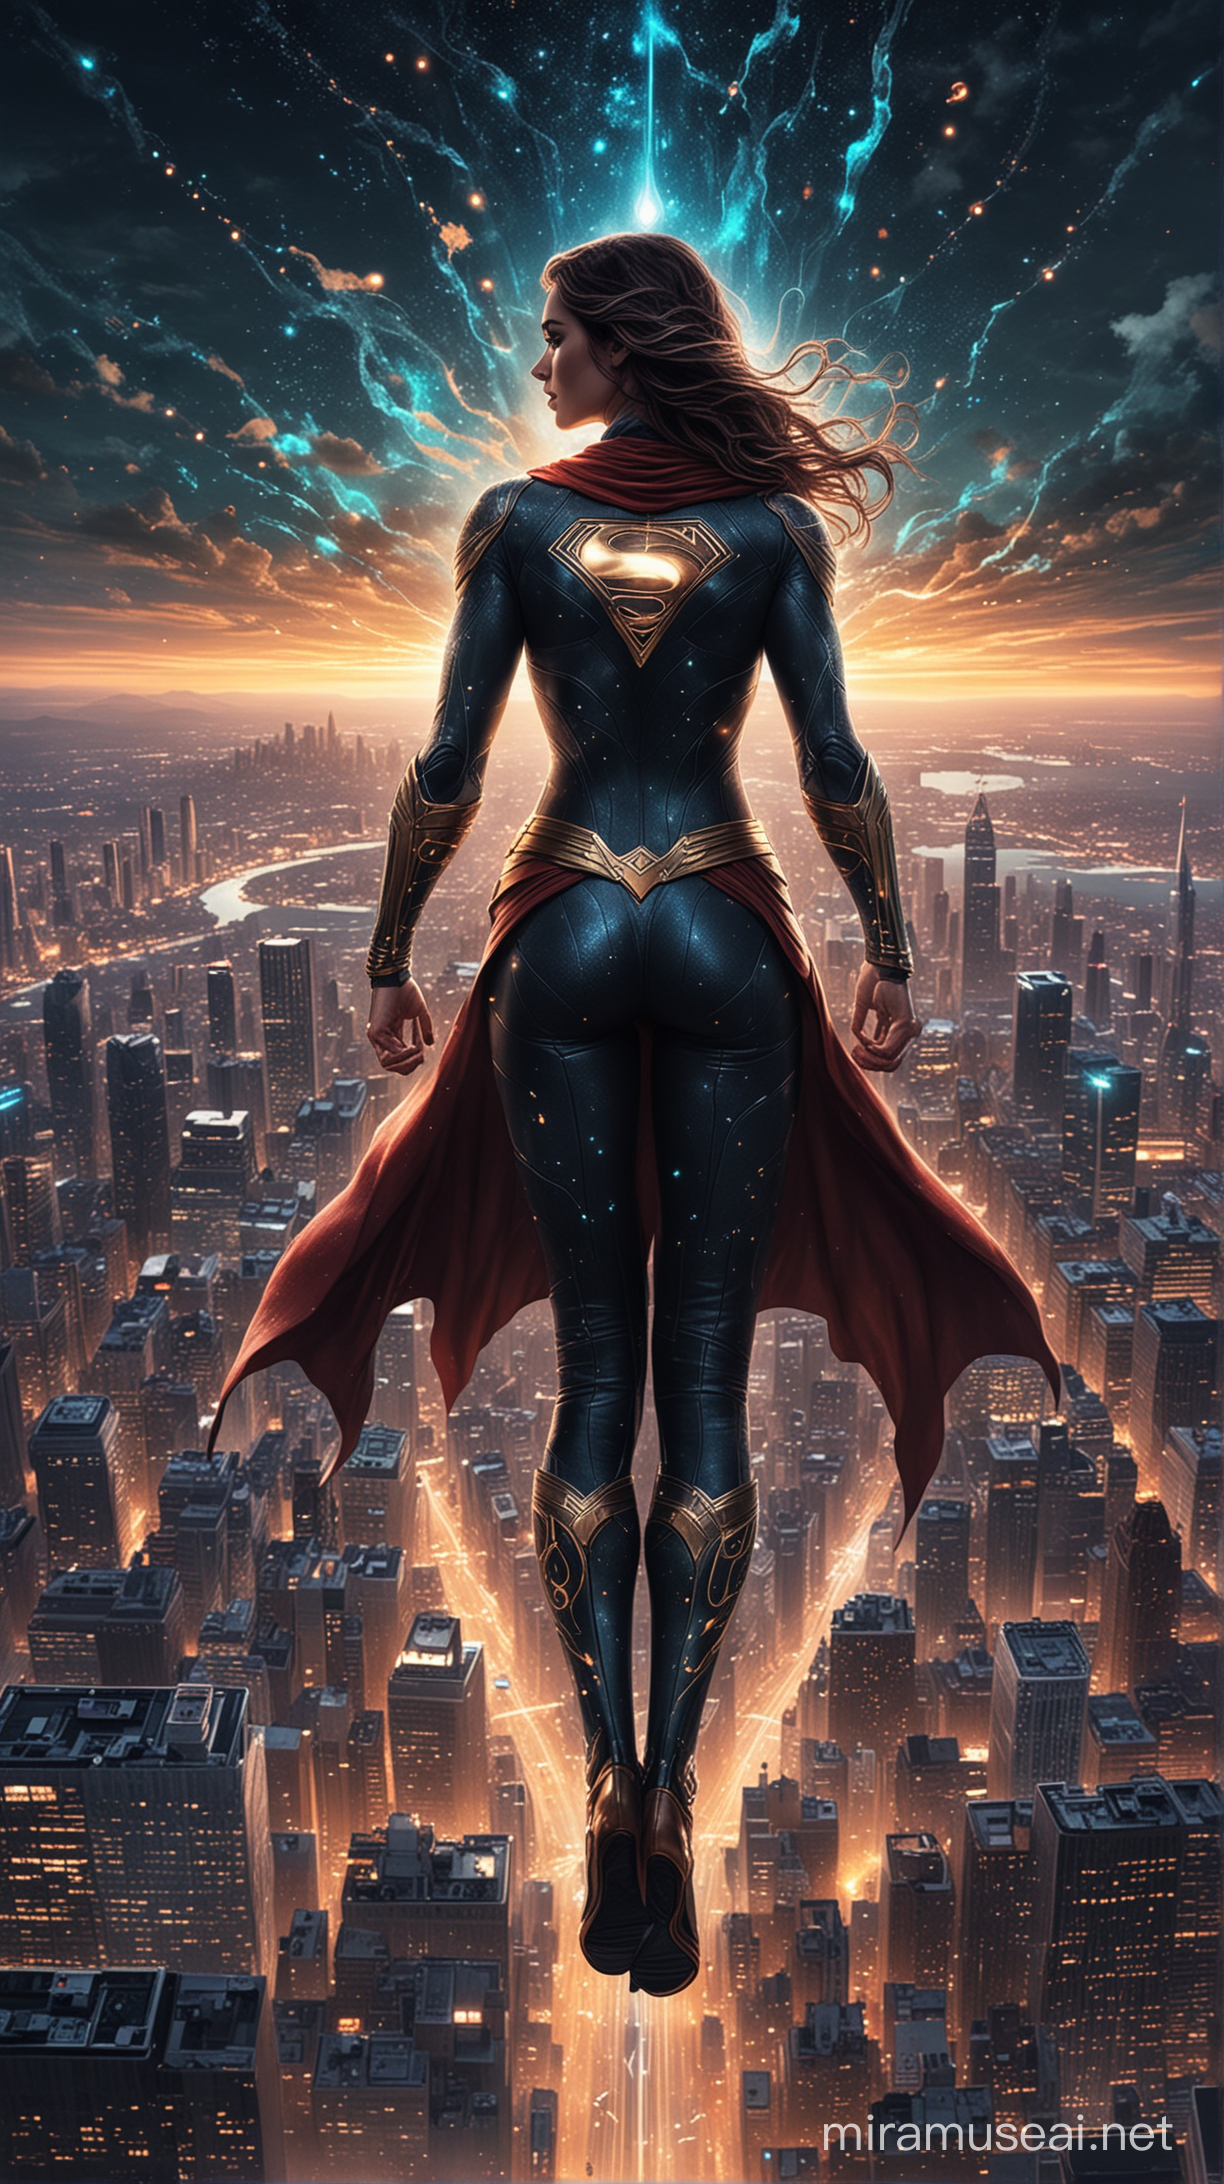 A mystical superhero stands atop a skyscraper, overlooking a city. Ethereal lights swirl around them, and their eyes glow with cosmic energy. The night sky is alive with constellations that mirror the superhero's luminous tattoos.